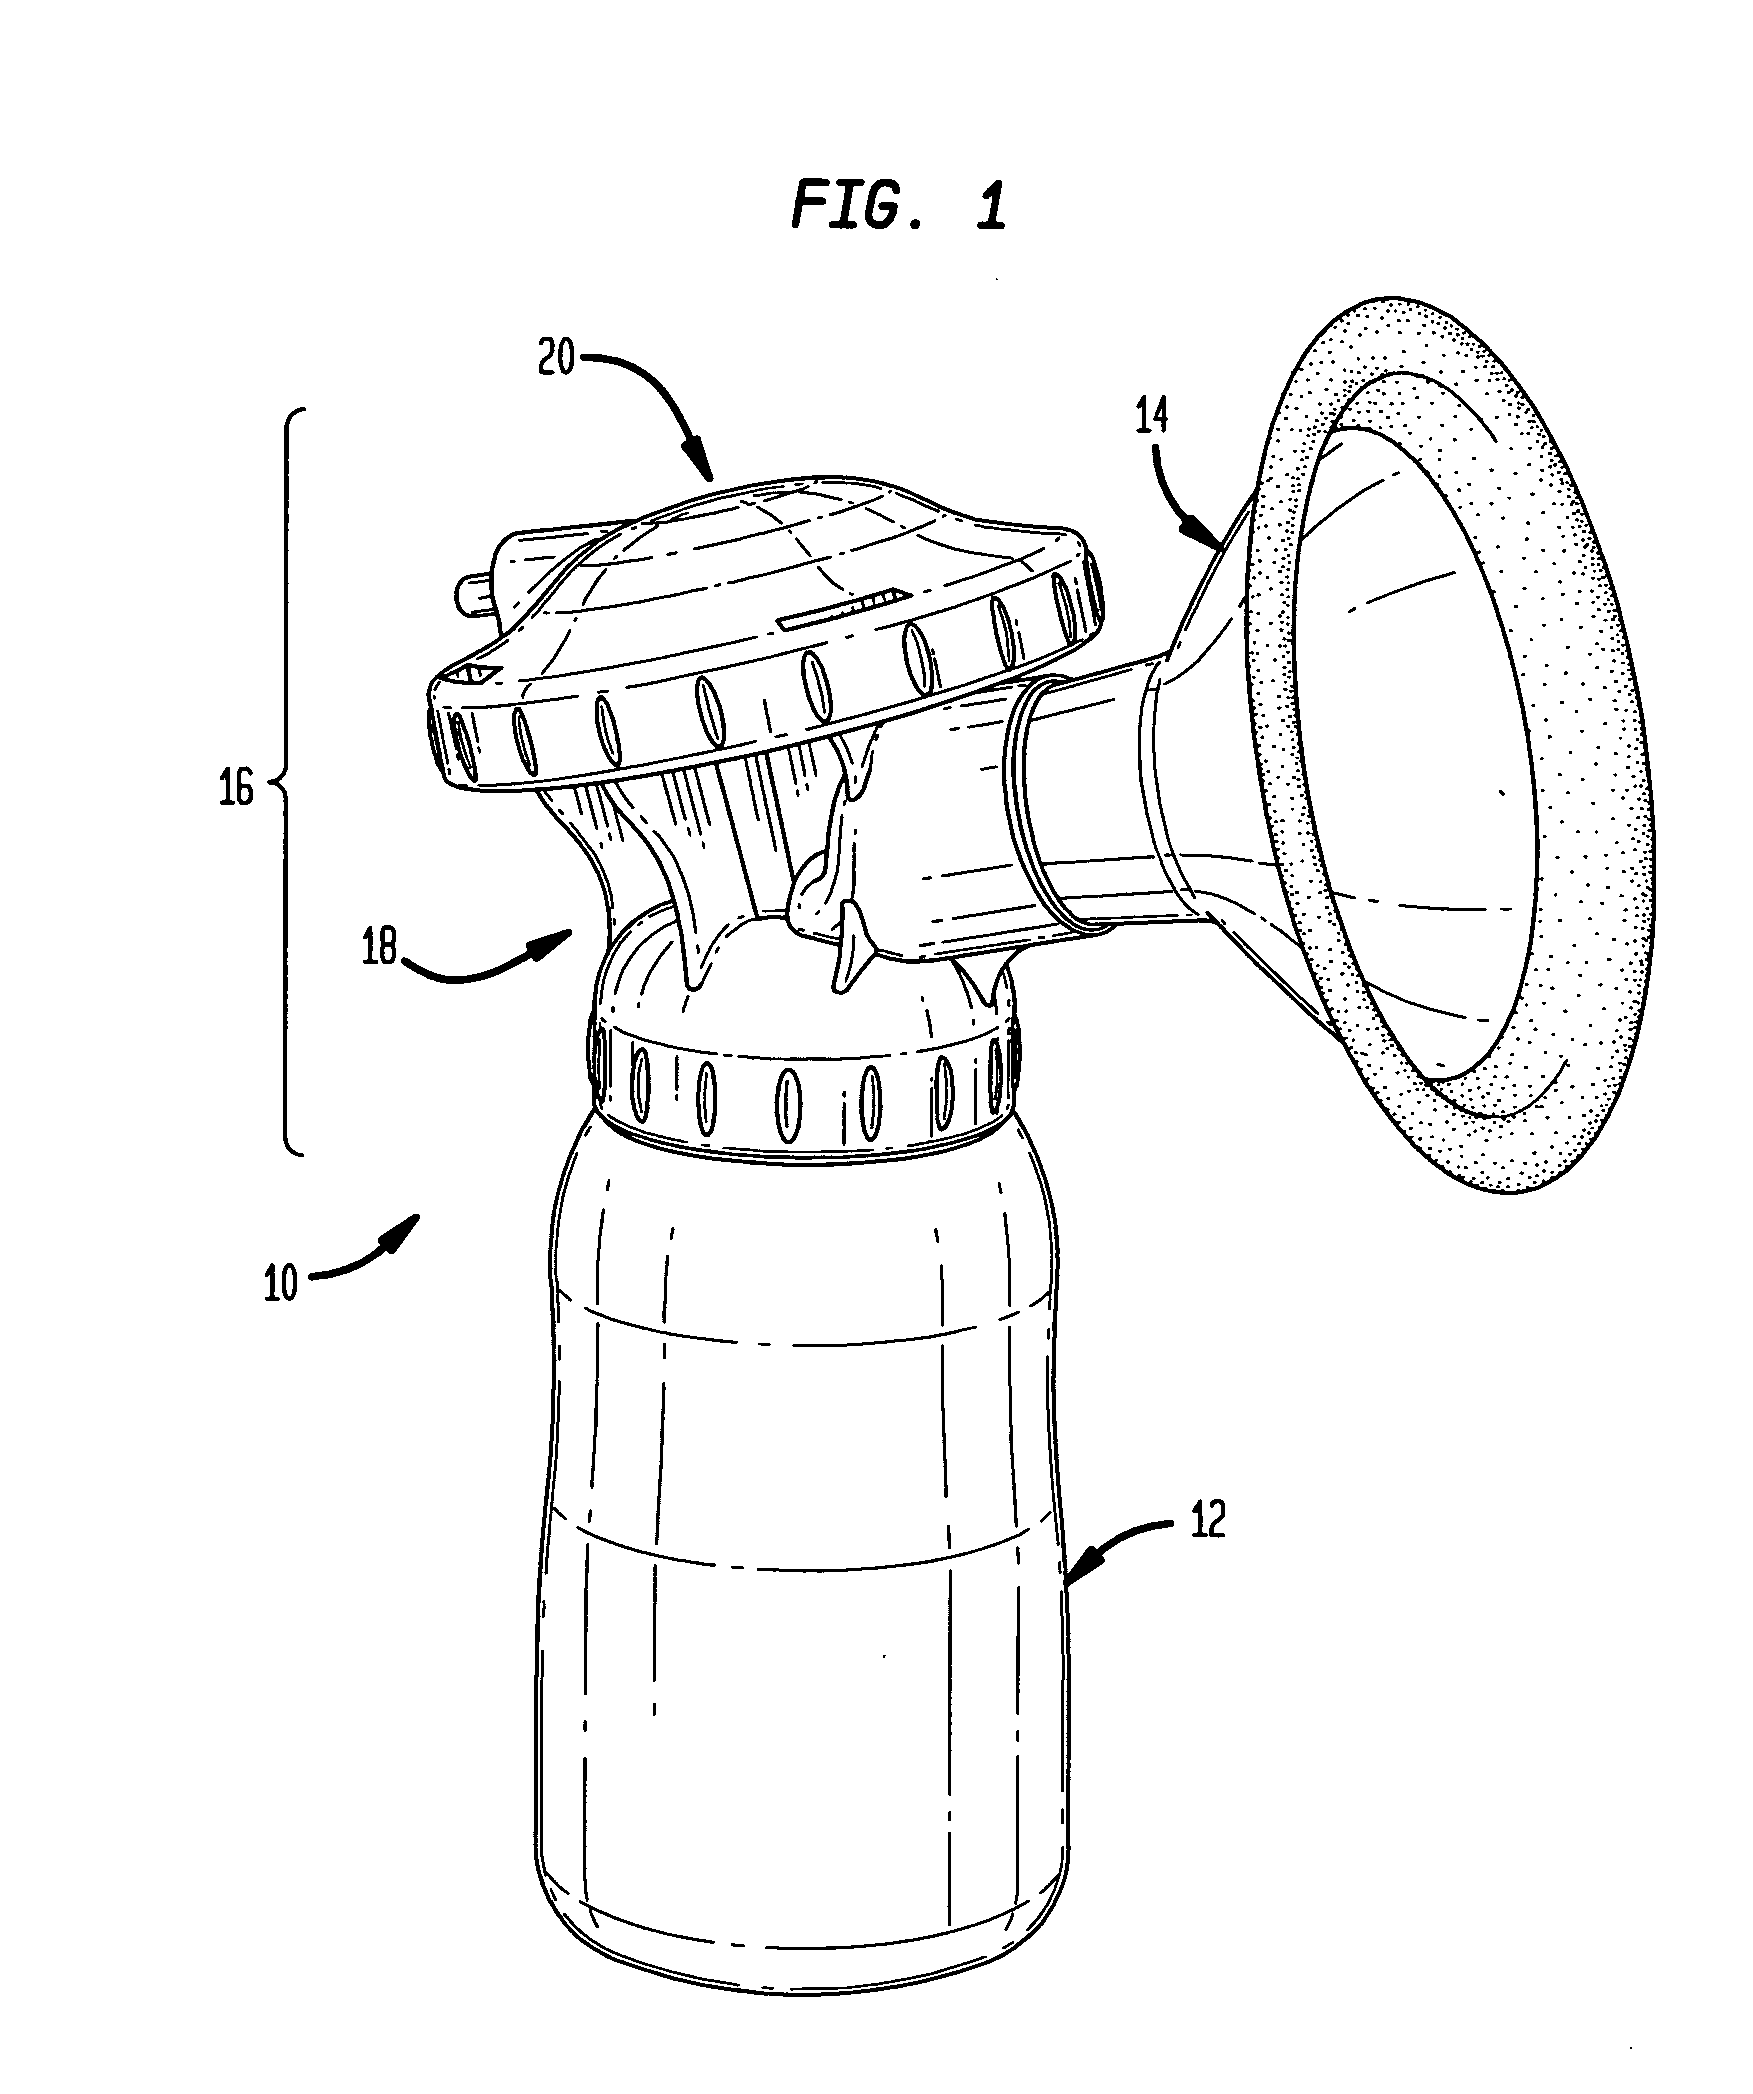 Breast milk collection apparatus and components thereof